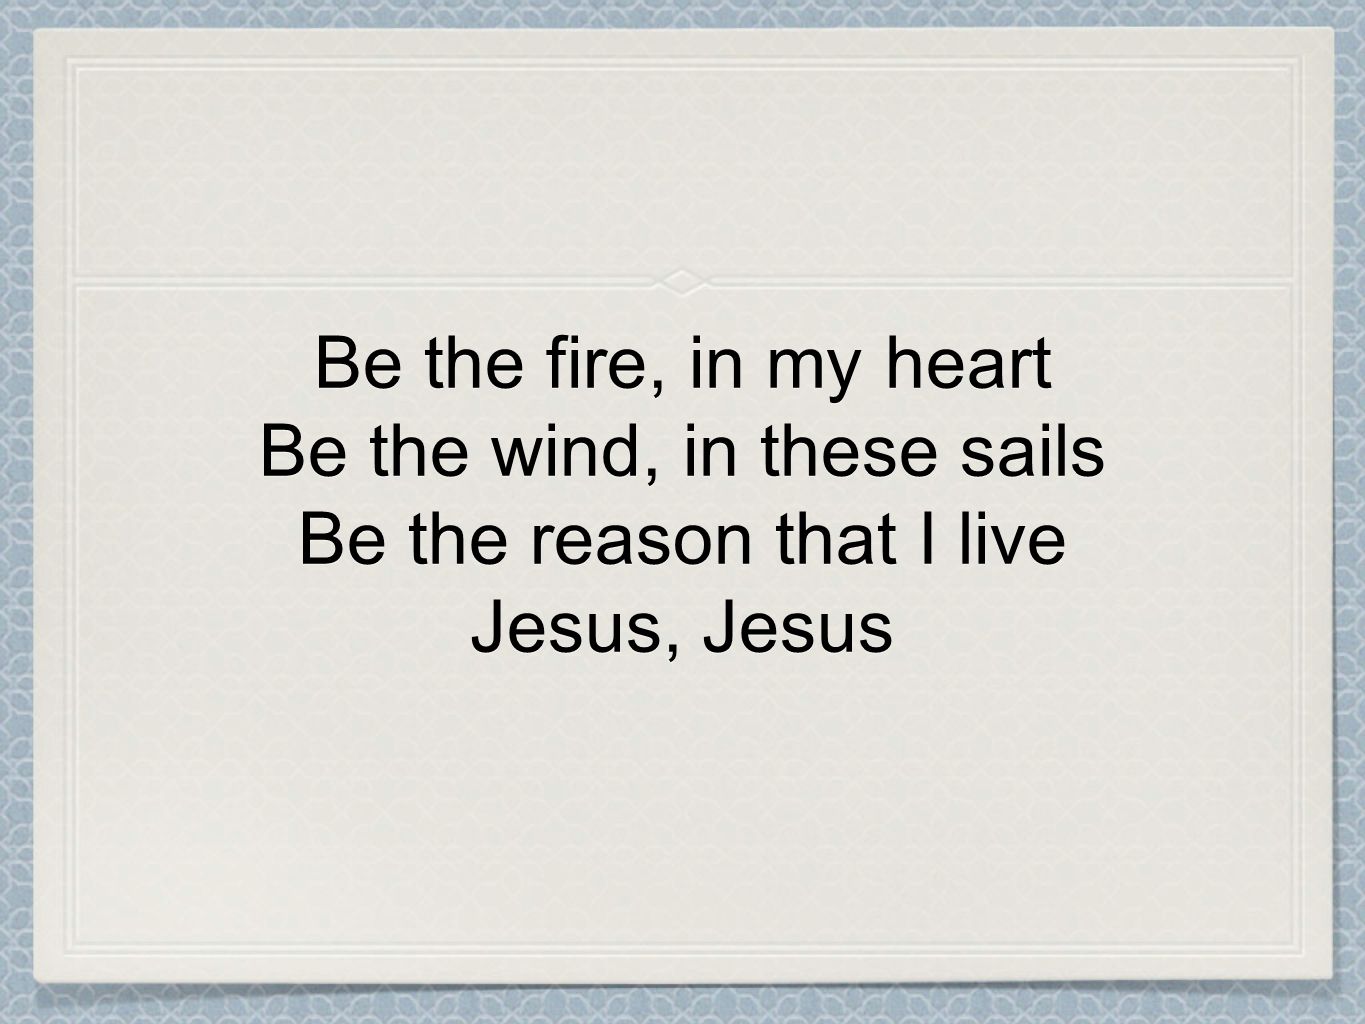 Be the fire, in my heart Be the wind, in these sails Be the reason that I live Jesus, Jesus